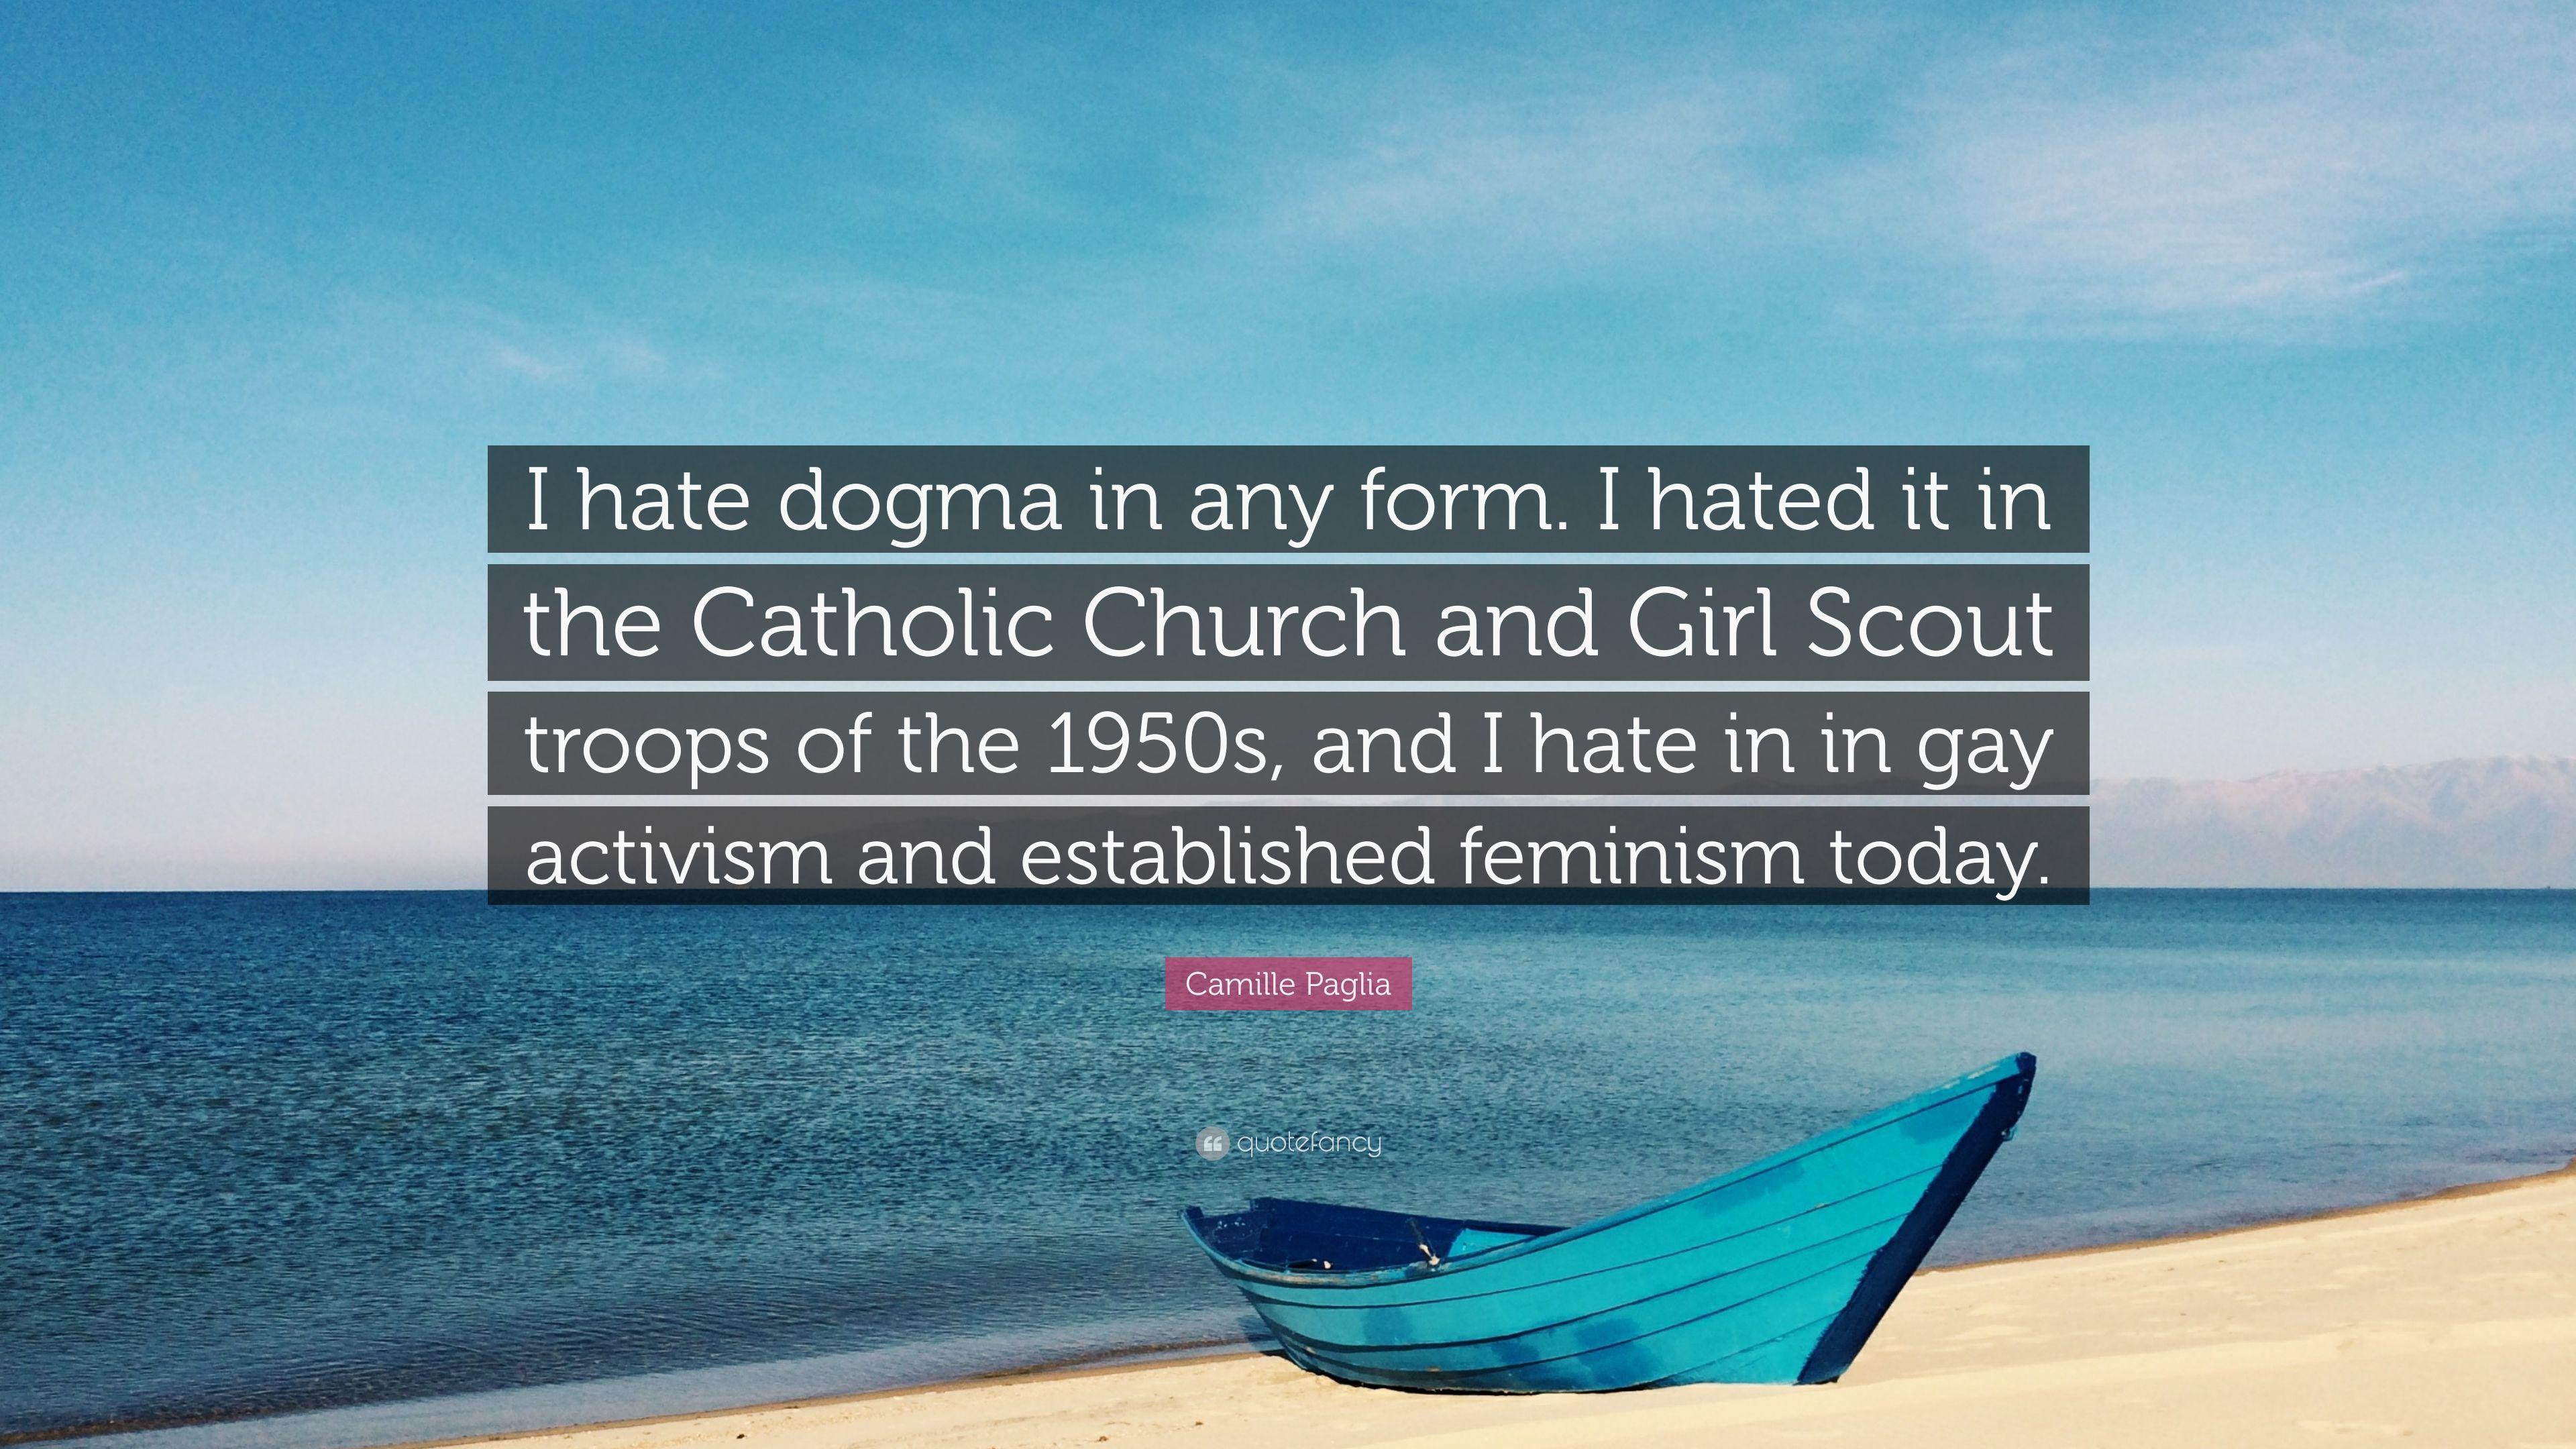 Camille Paglia Quote: “I hate dogma in any form. I hated it in